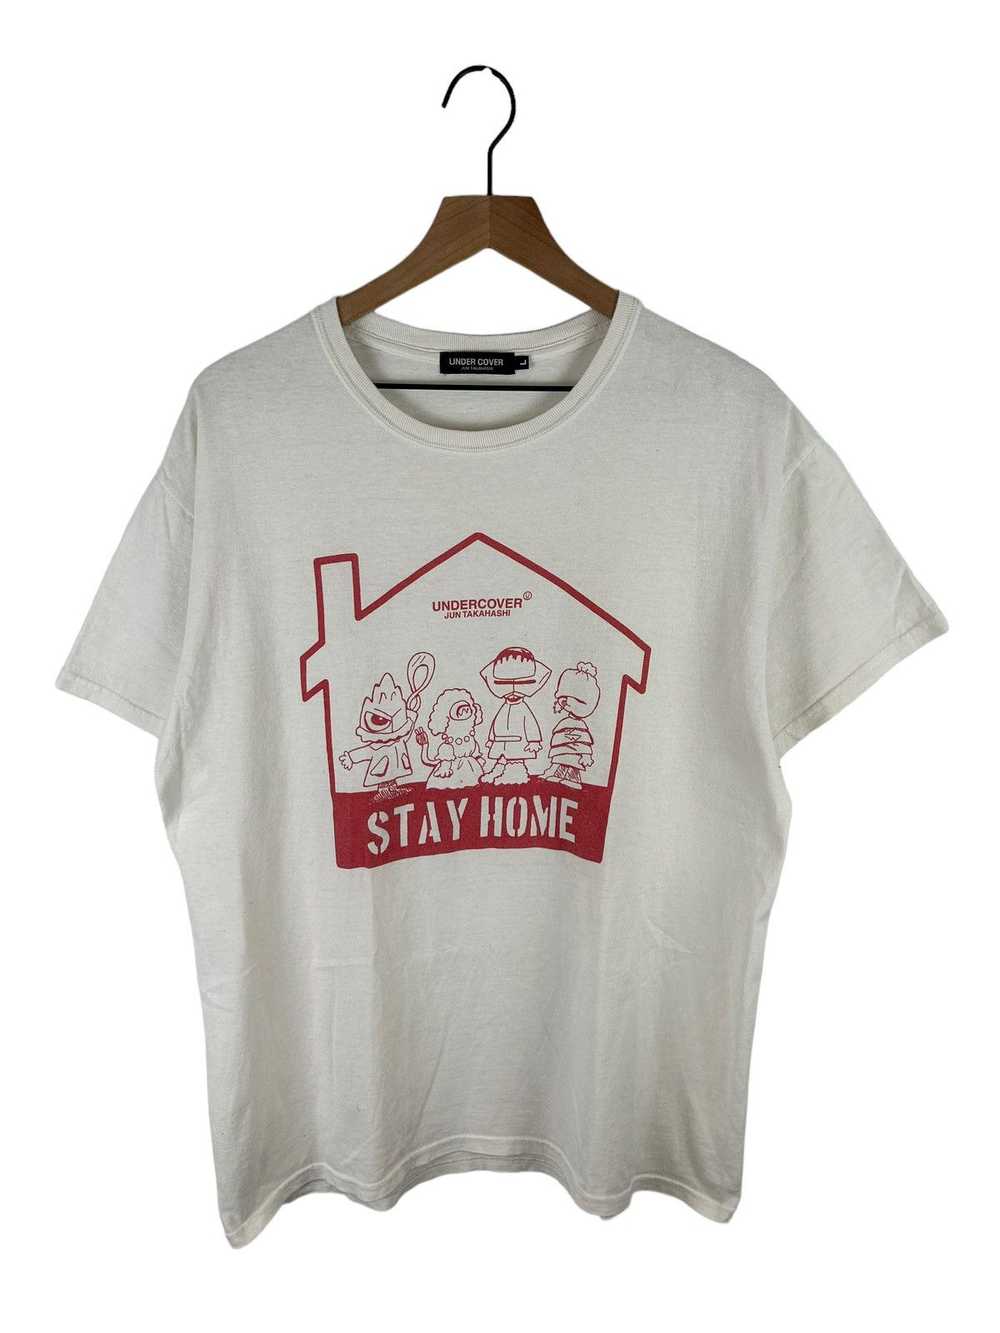 Undercover Undercover Stay Home Print T-Shirt - image 1